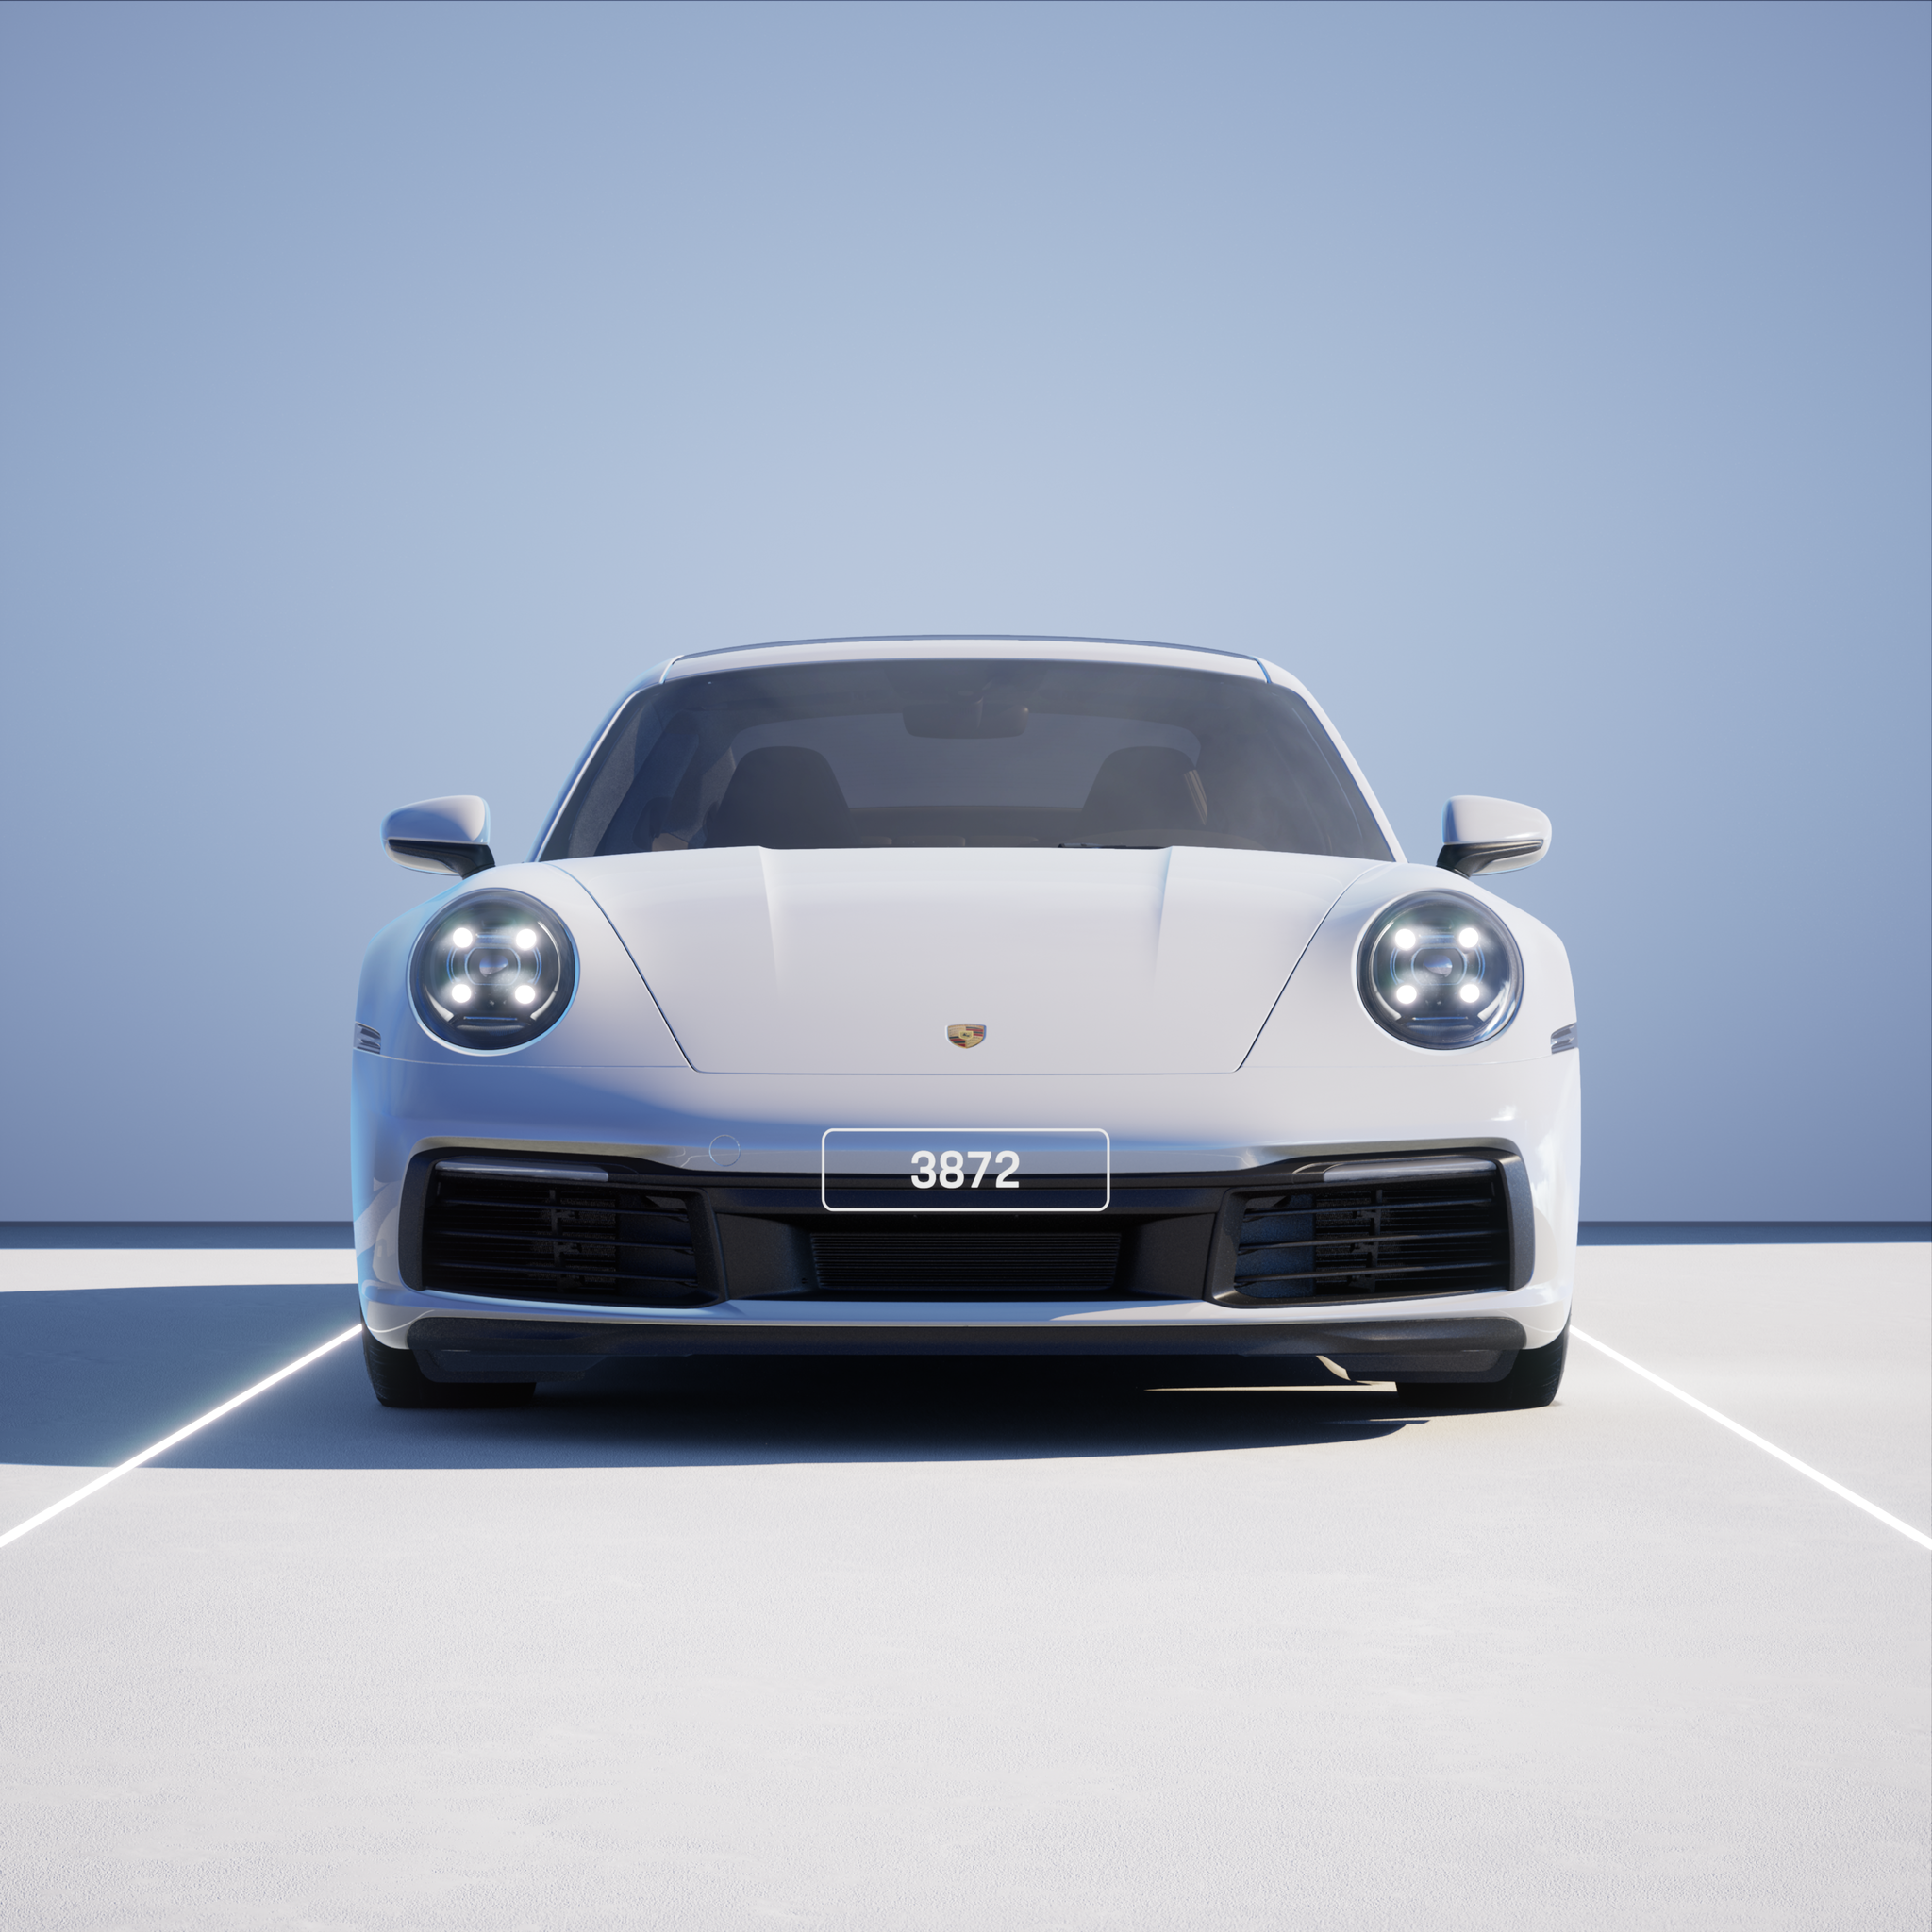 The PORSCHΞ 911 3872 image in phase